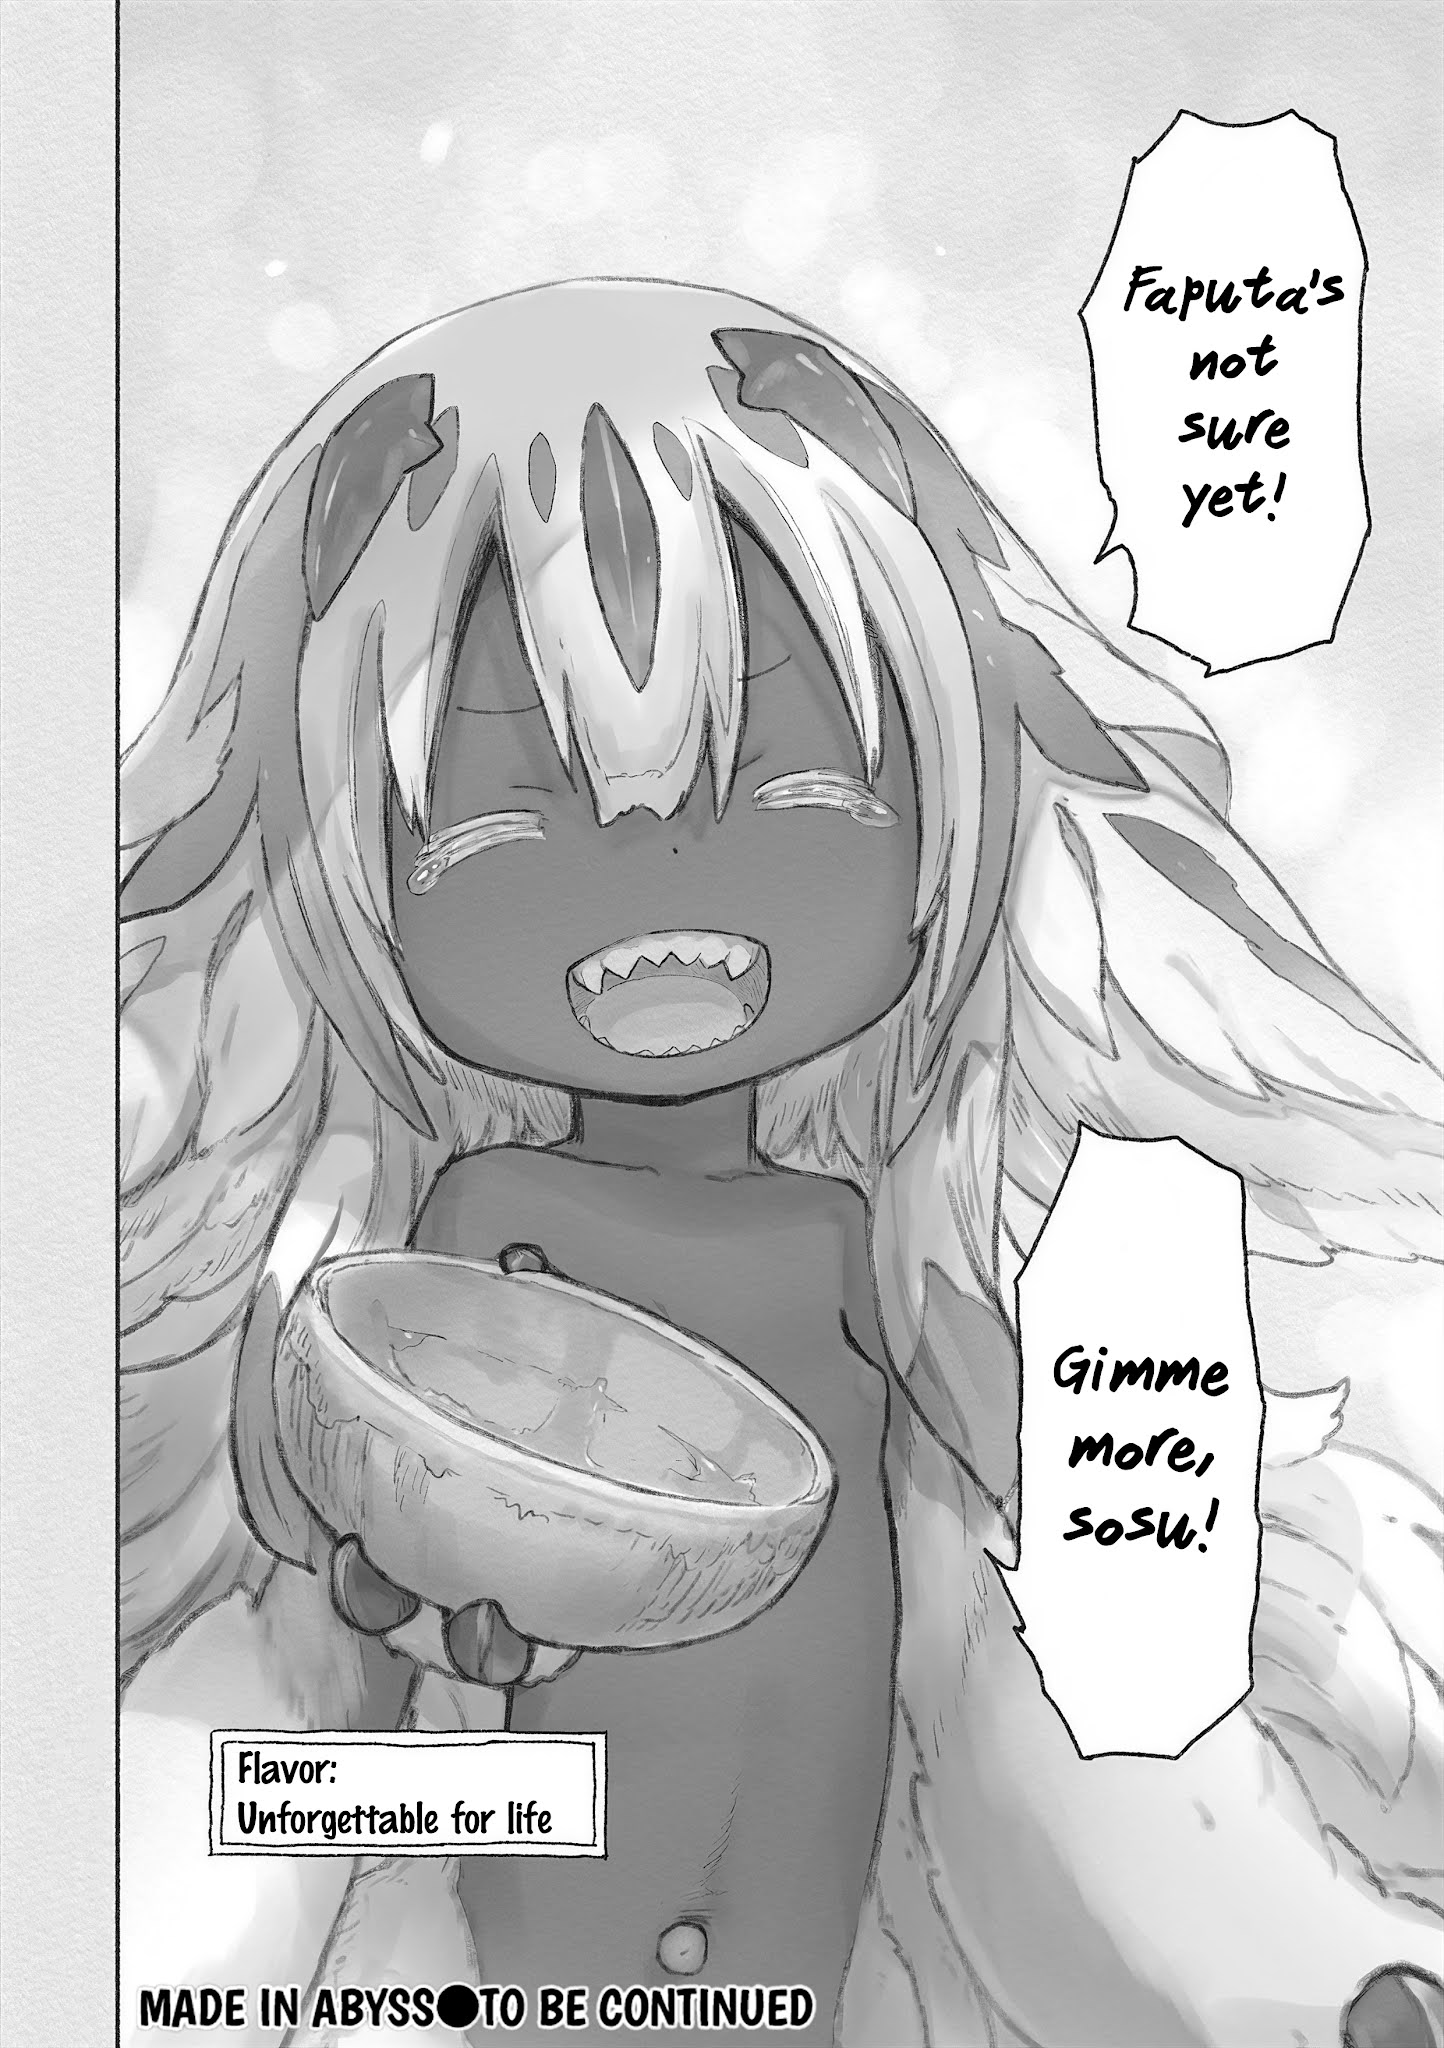 Made In Abyss Chapter 61 Made in Abyss, Chapter 61 - Hello Abyss - Made in Abyss Manga Online